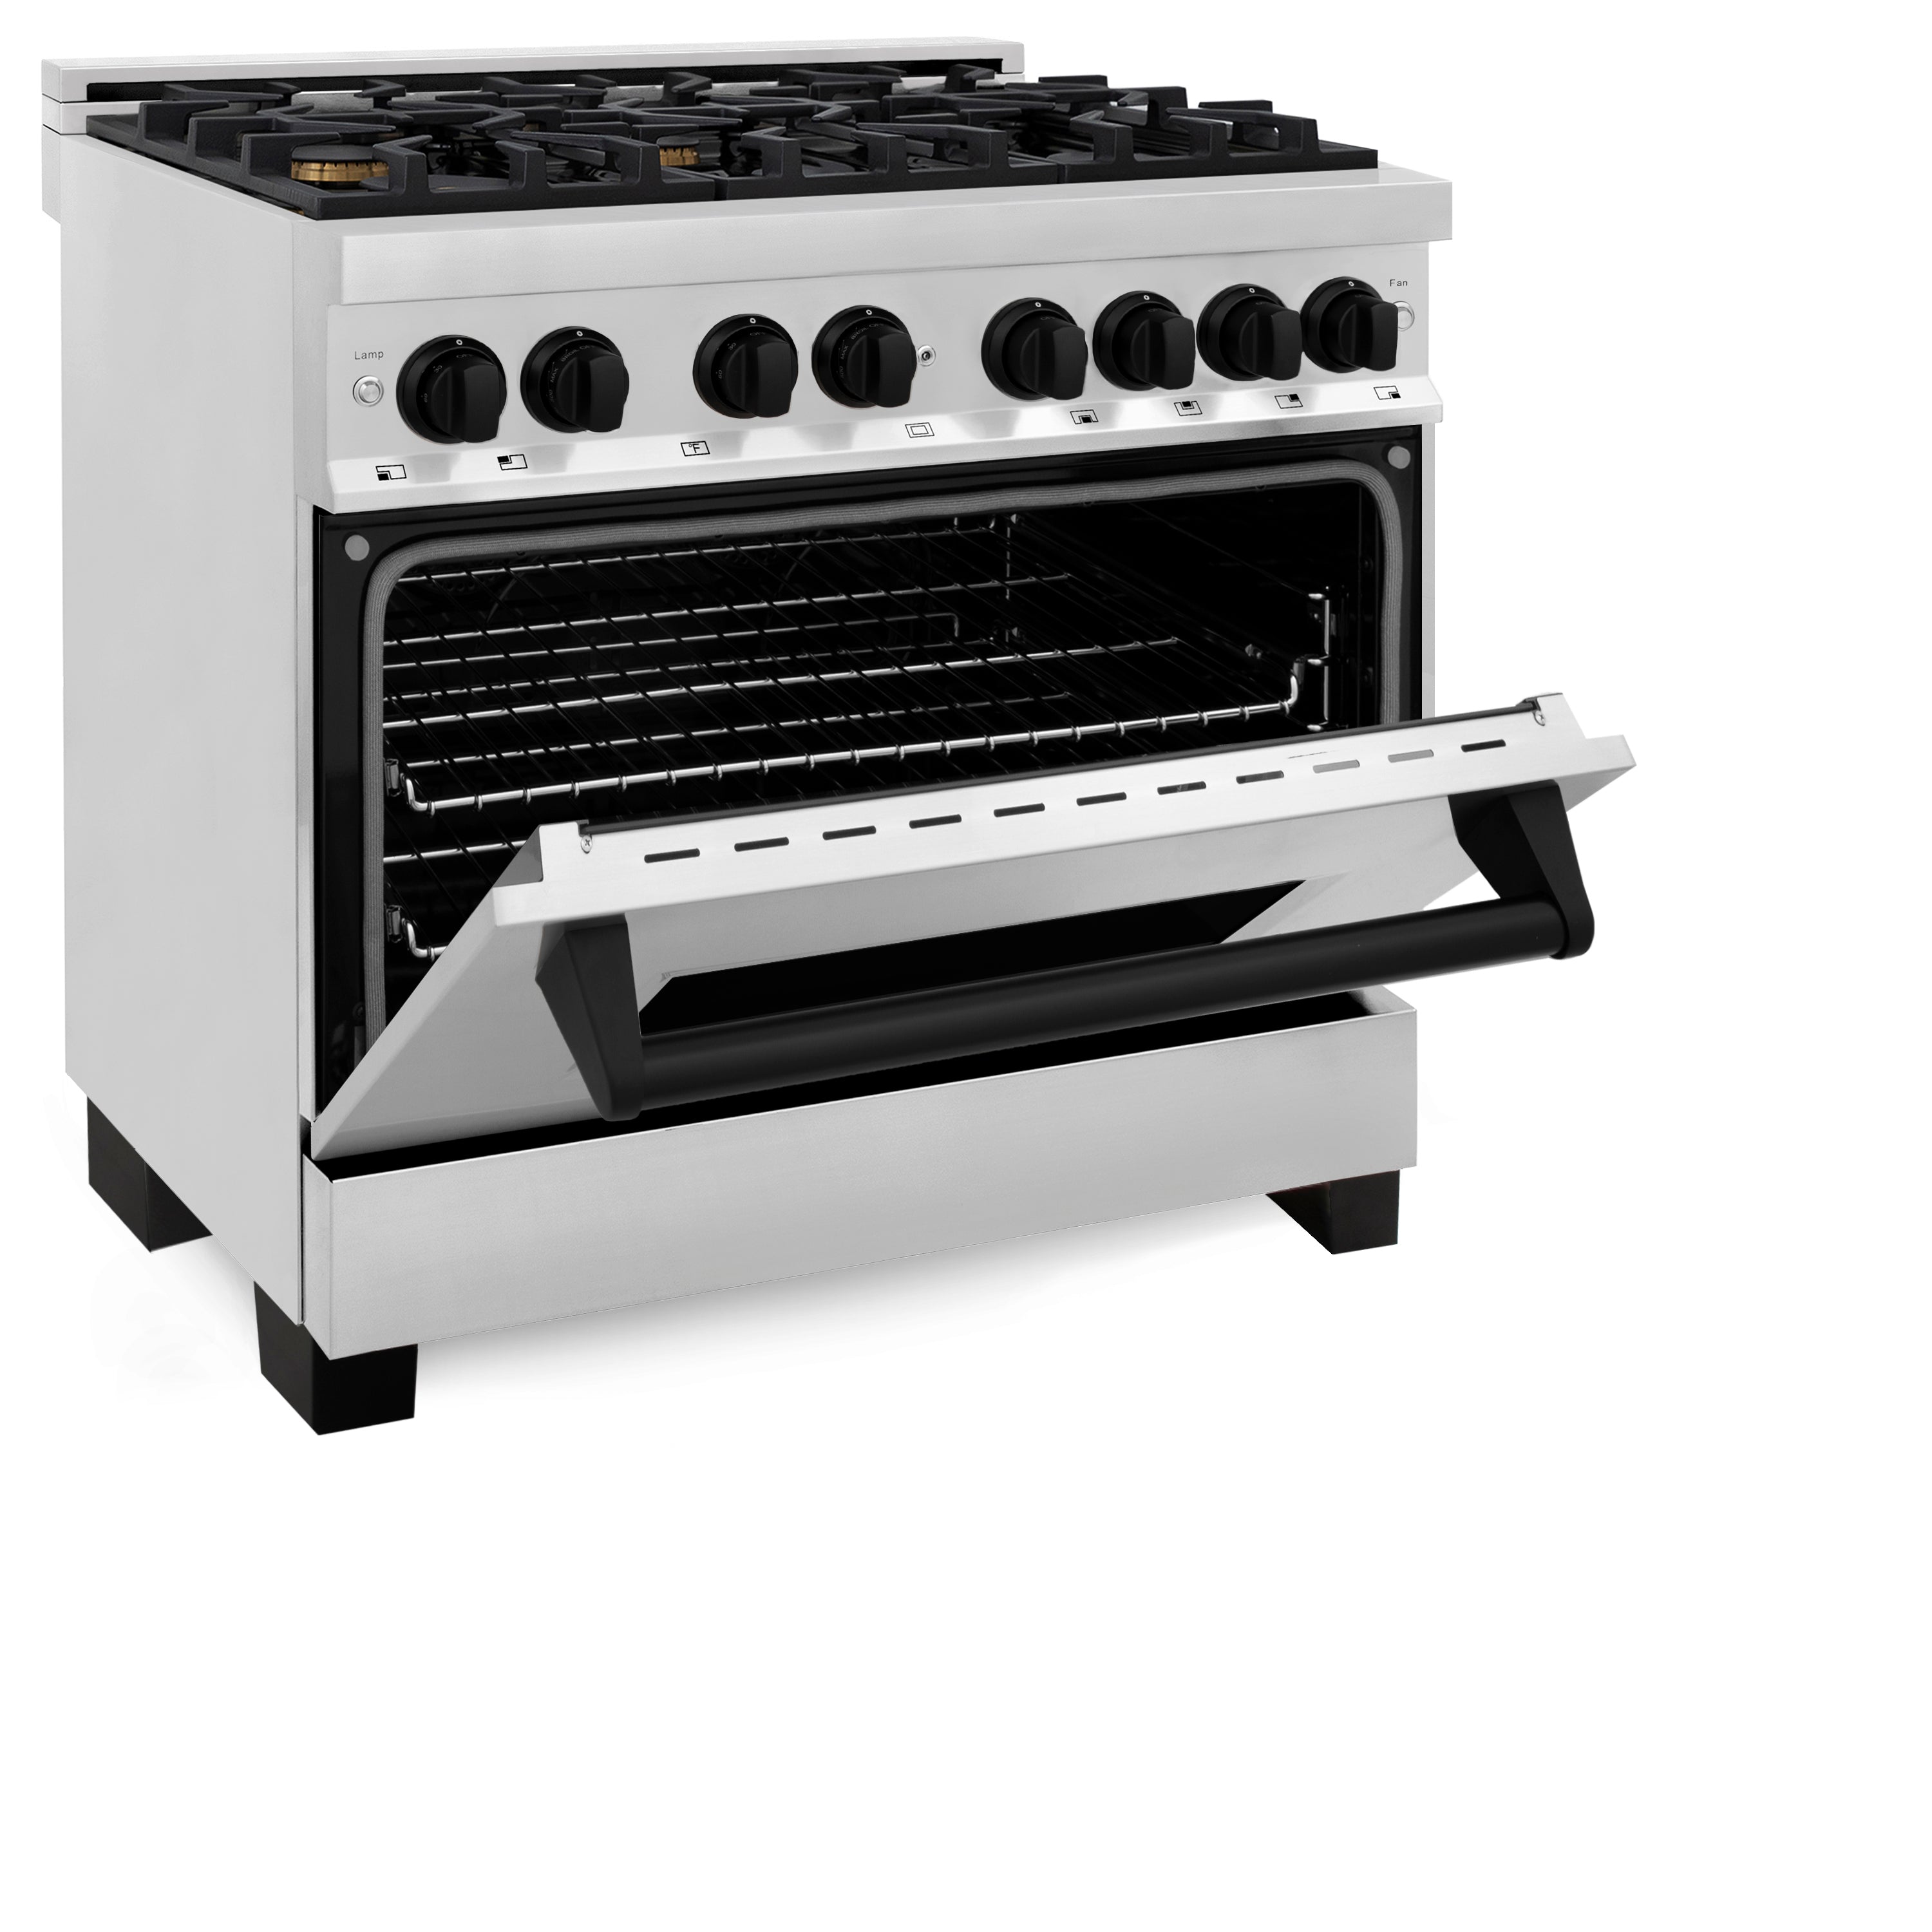 ZLINE Autograph Edition 36" 4.6 cu. ft. Dual Fuel Range with Gas Stove and Electric Oven in Stainless Steel with Accents (RAZ-36-MB)